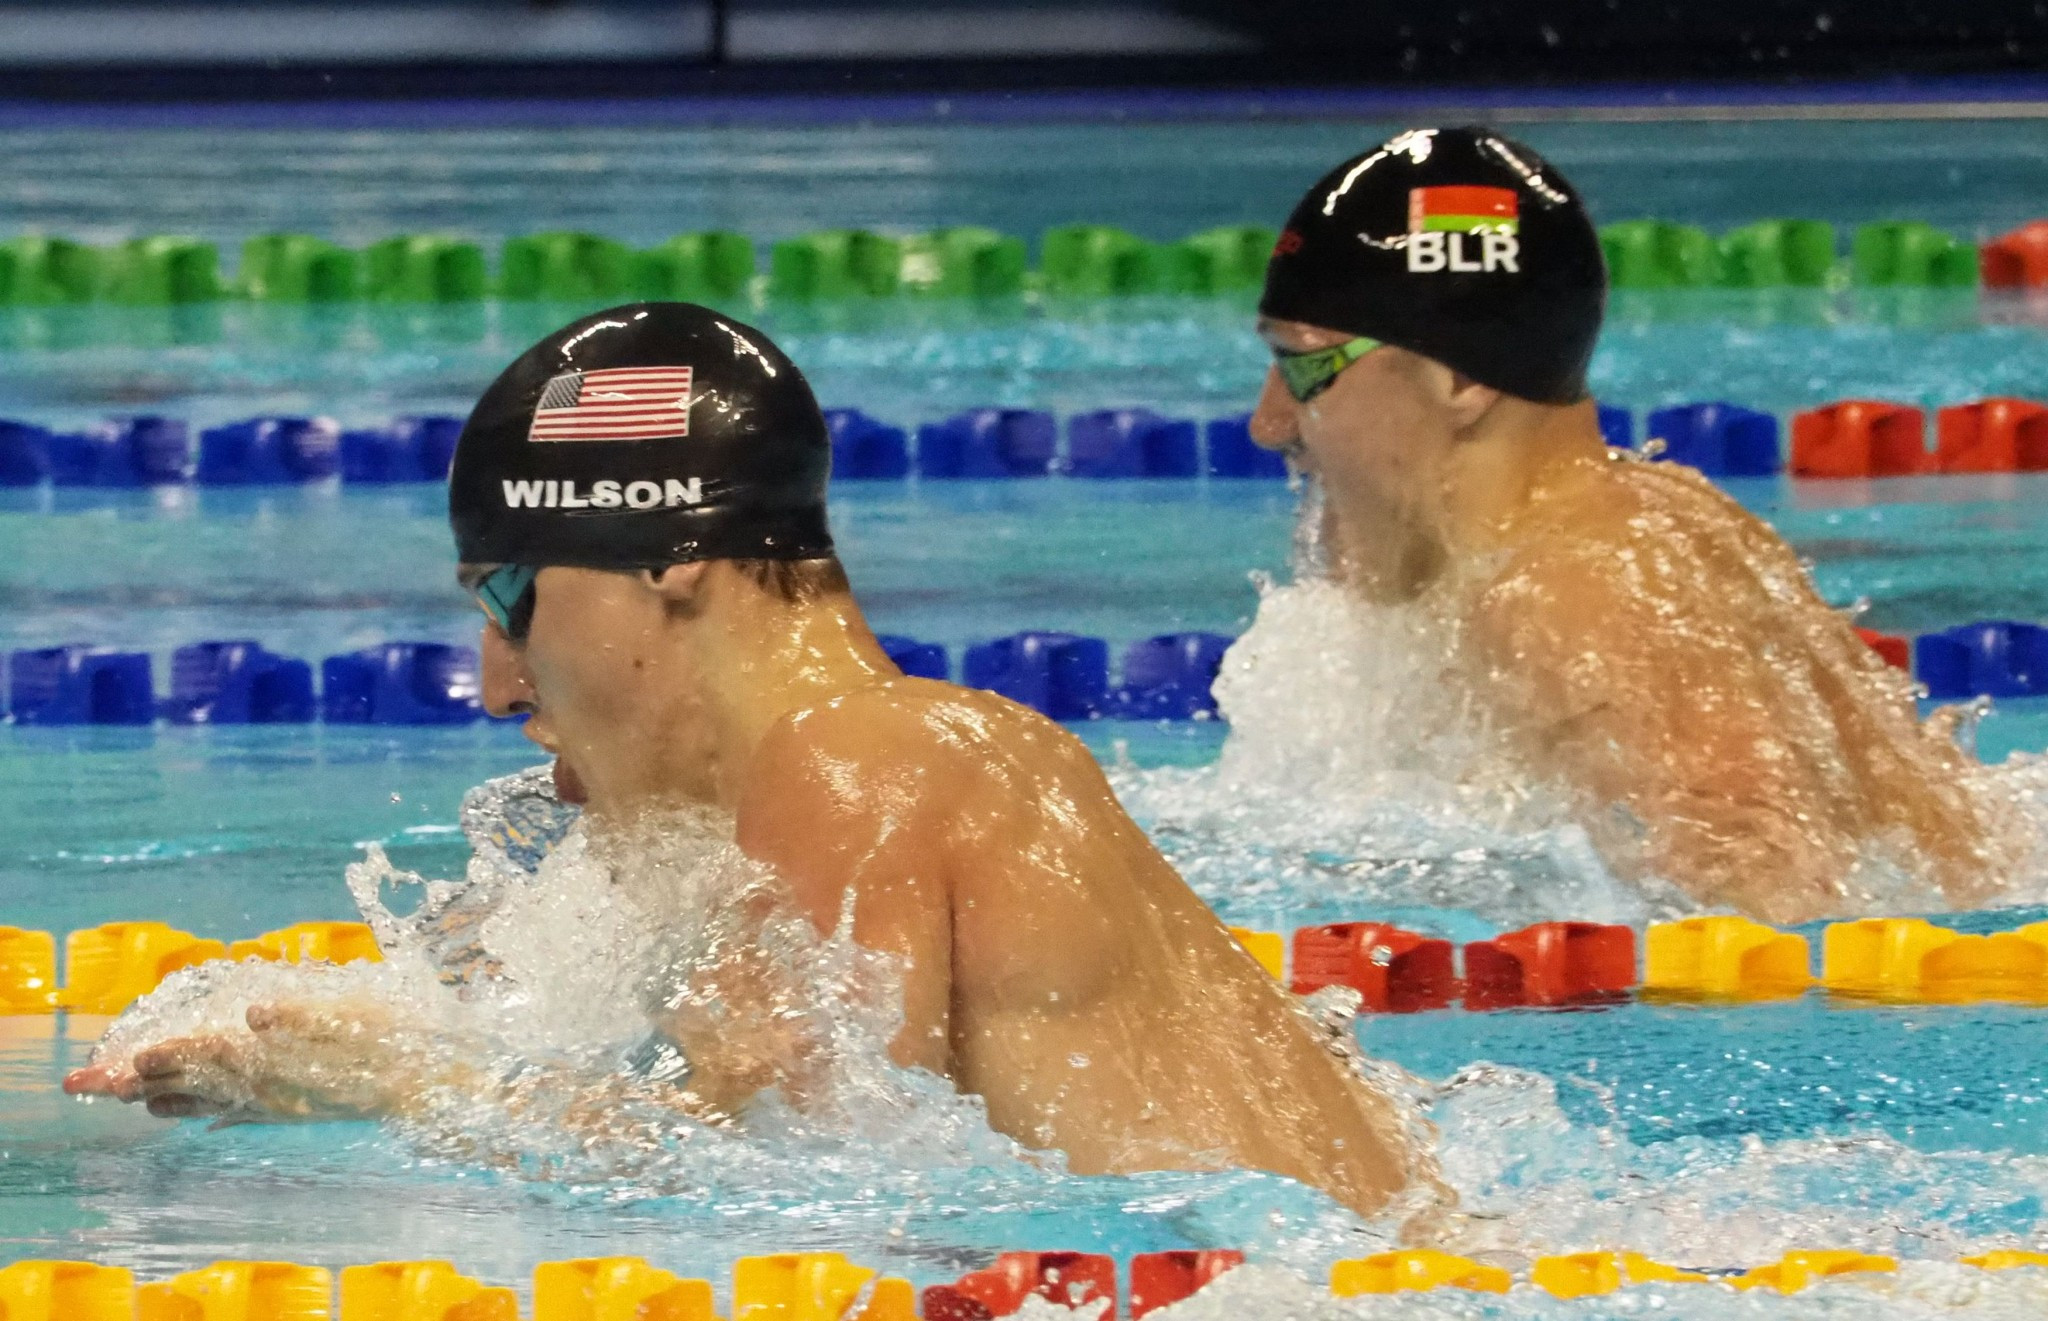 Wilson and Shymanovich share gold after sensational swimming finish at Univesiade